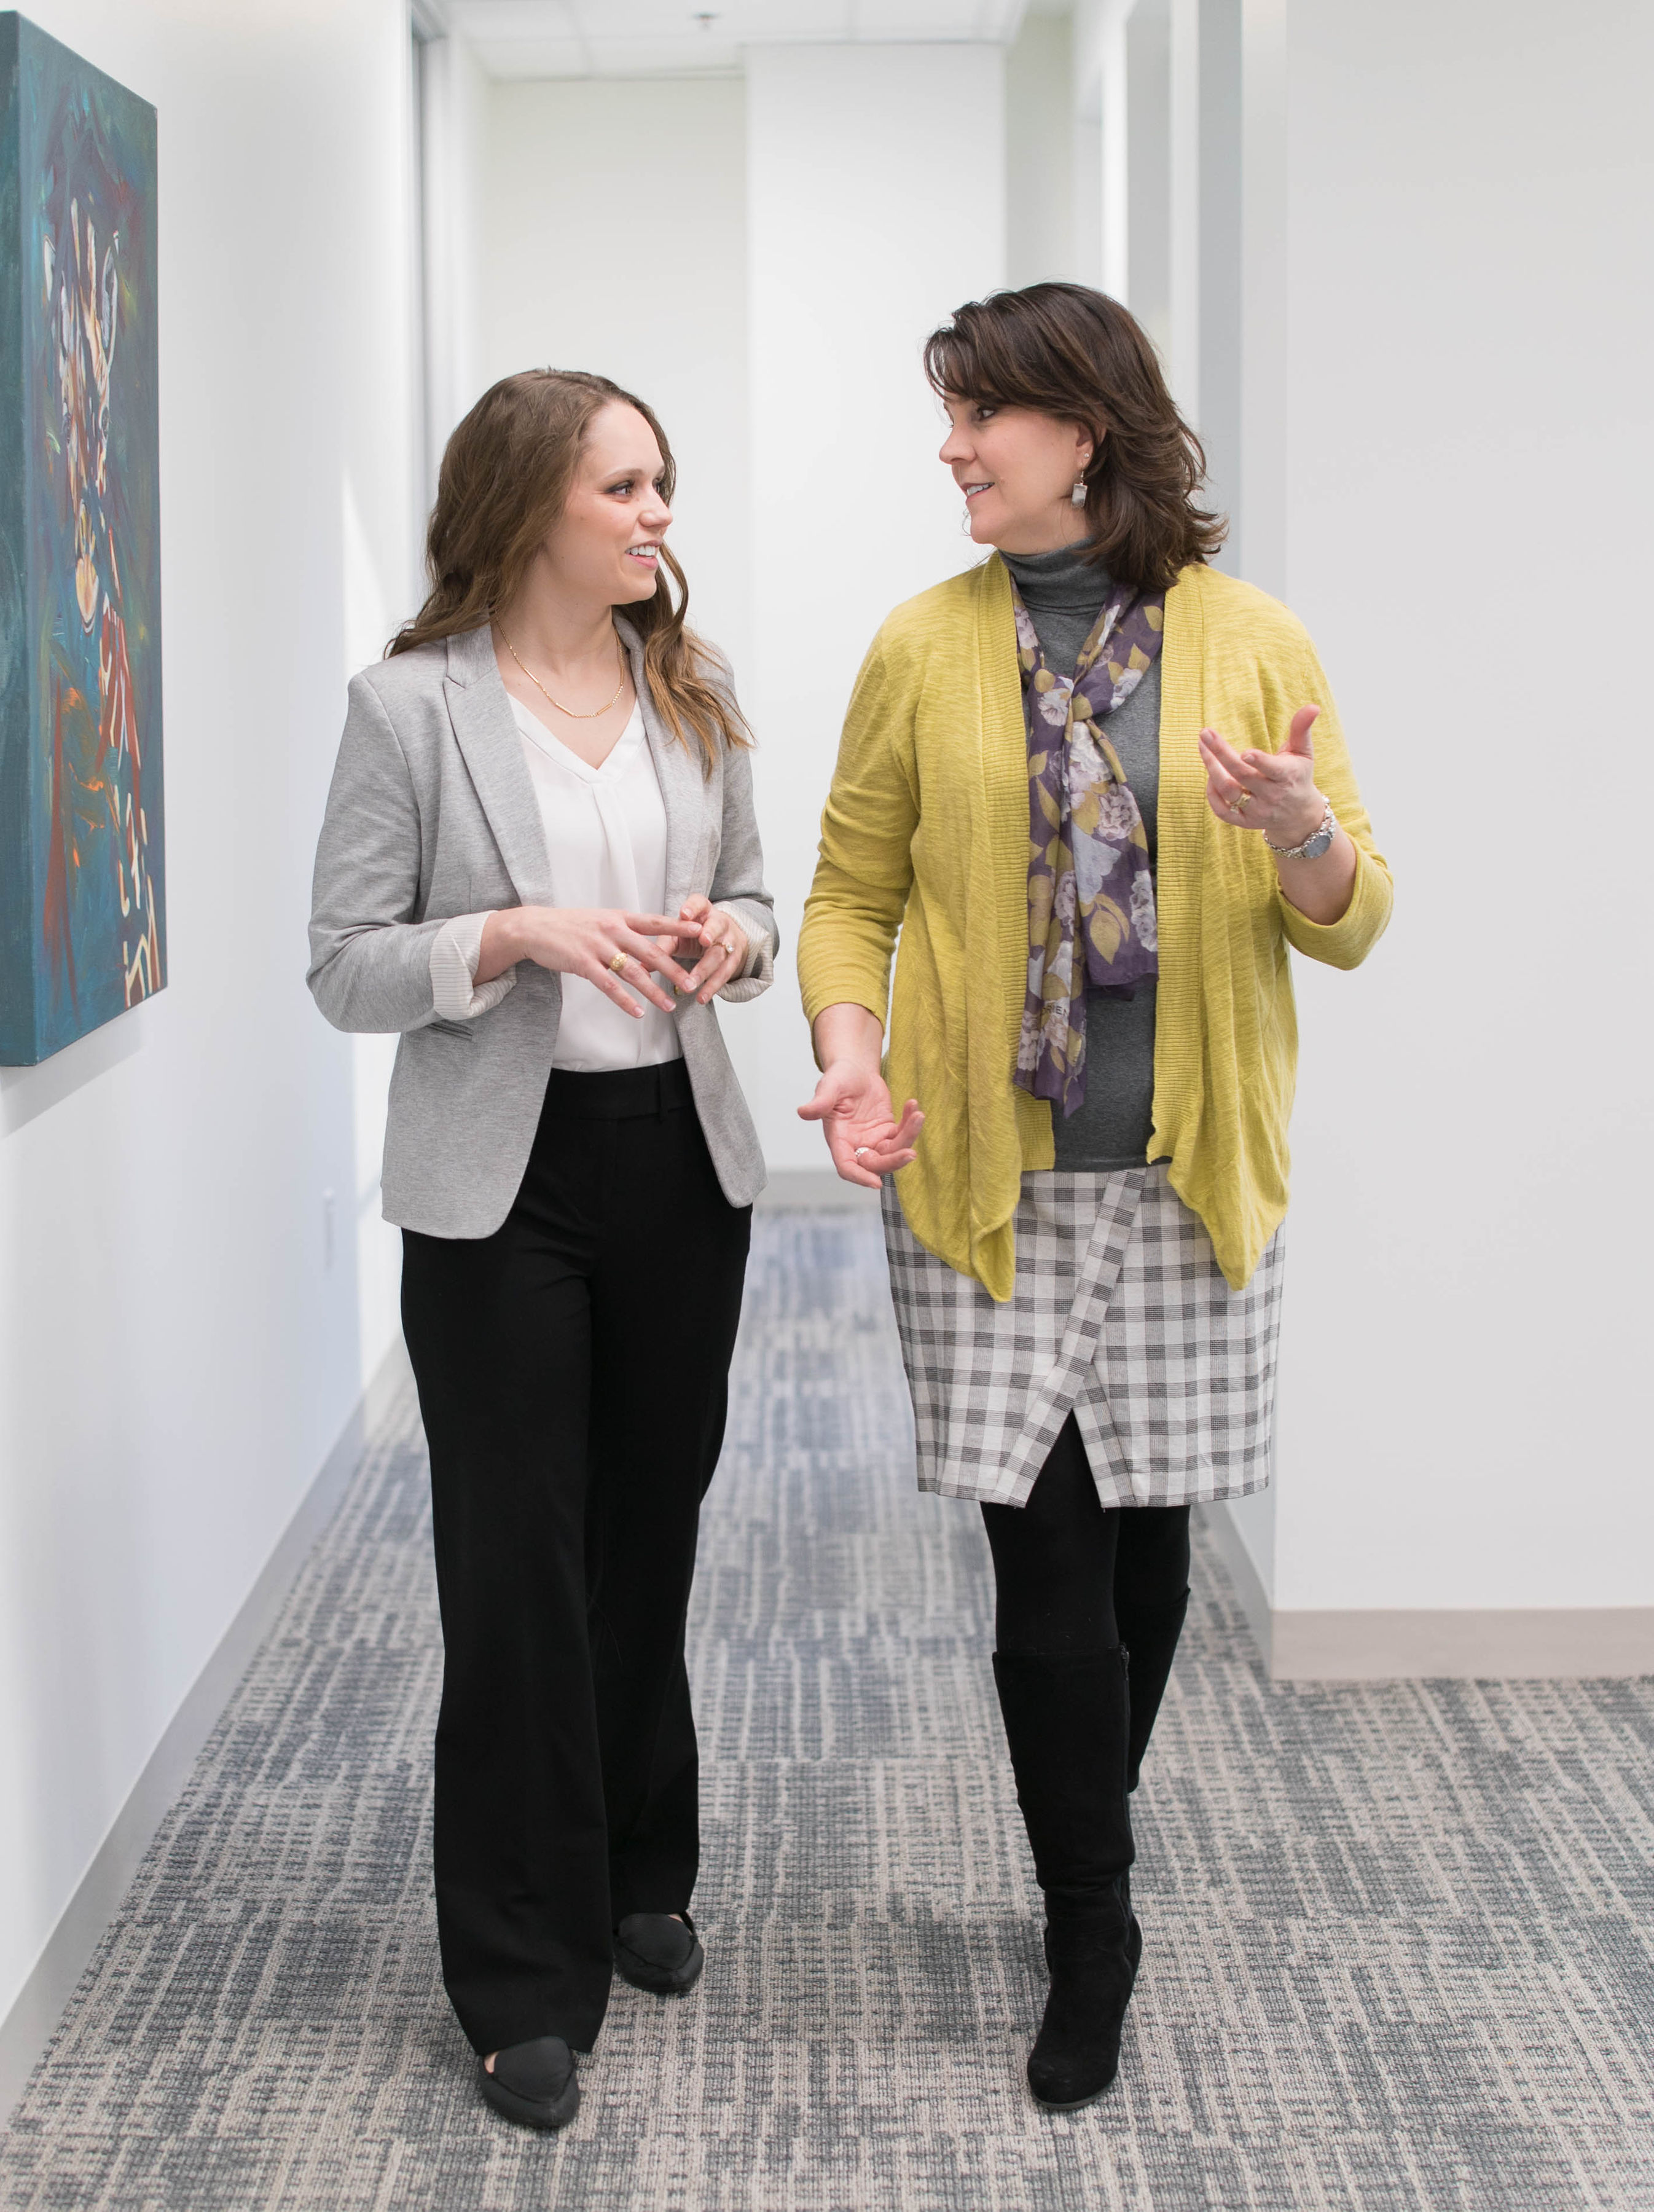 Two Caucasian females walking down a hallway conversing with one another while using their hands to speak